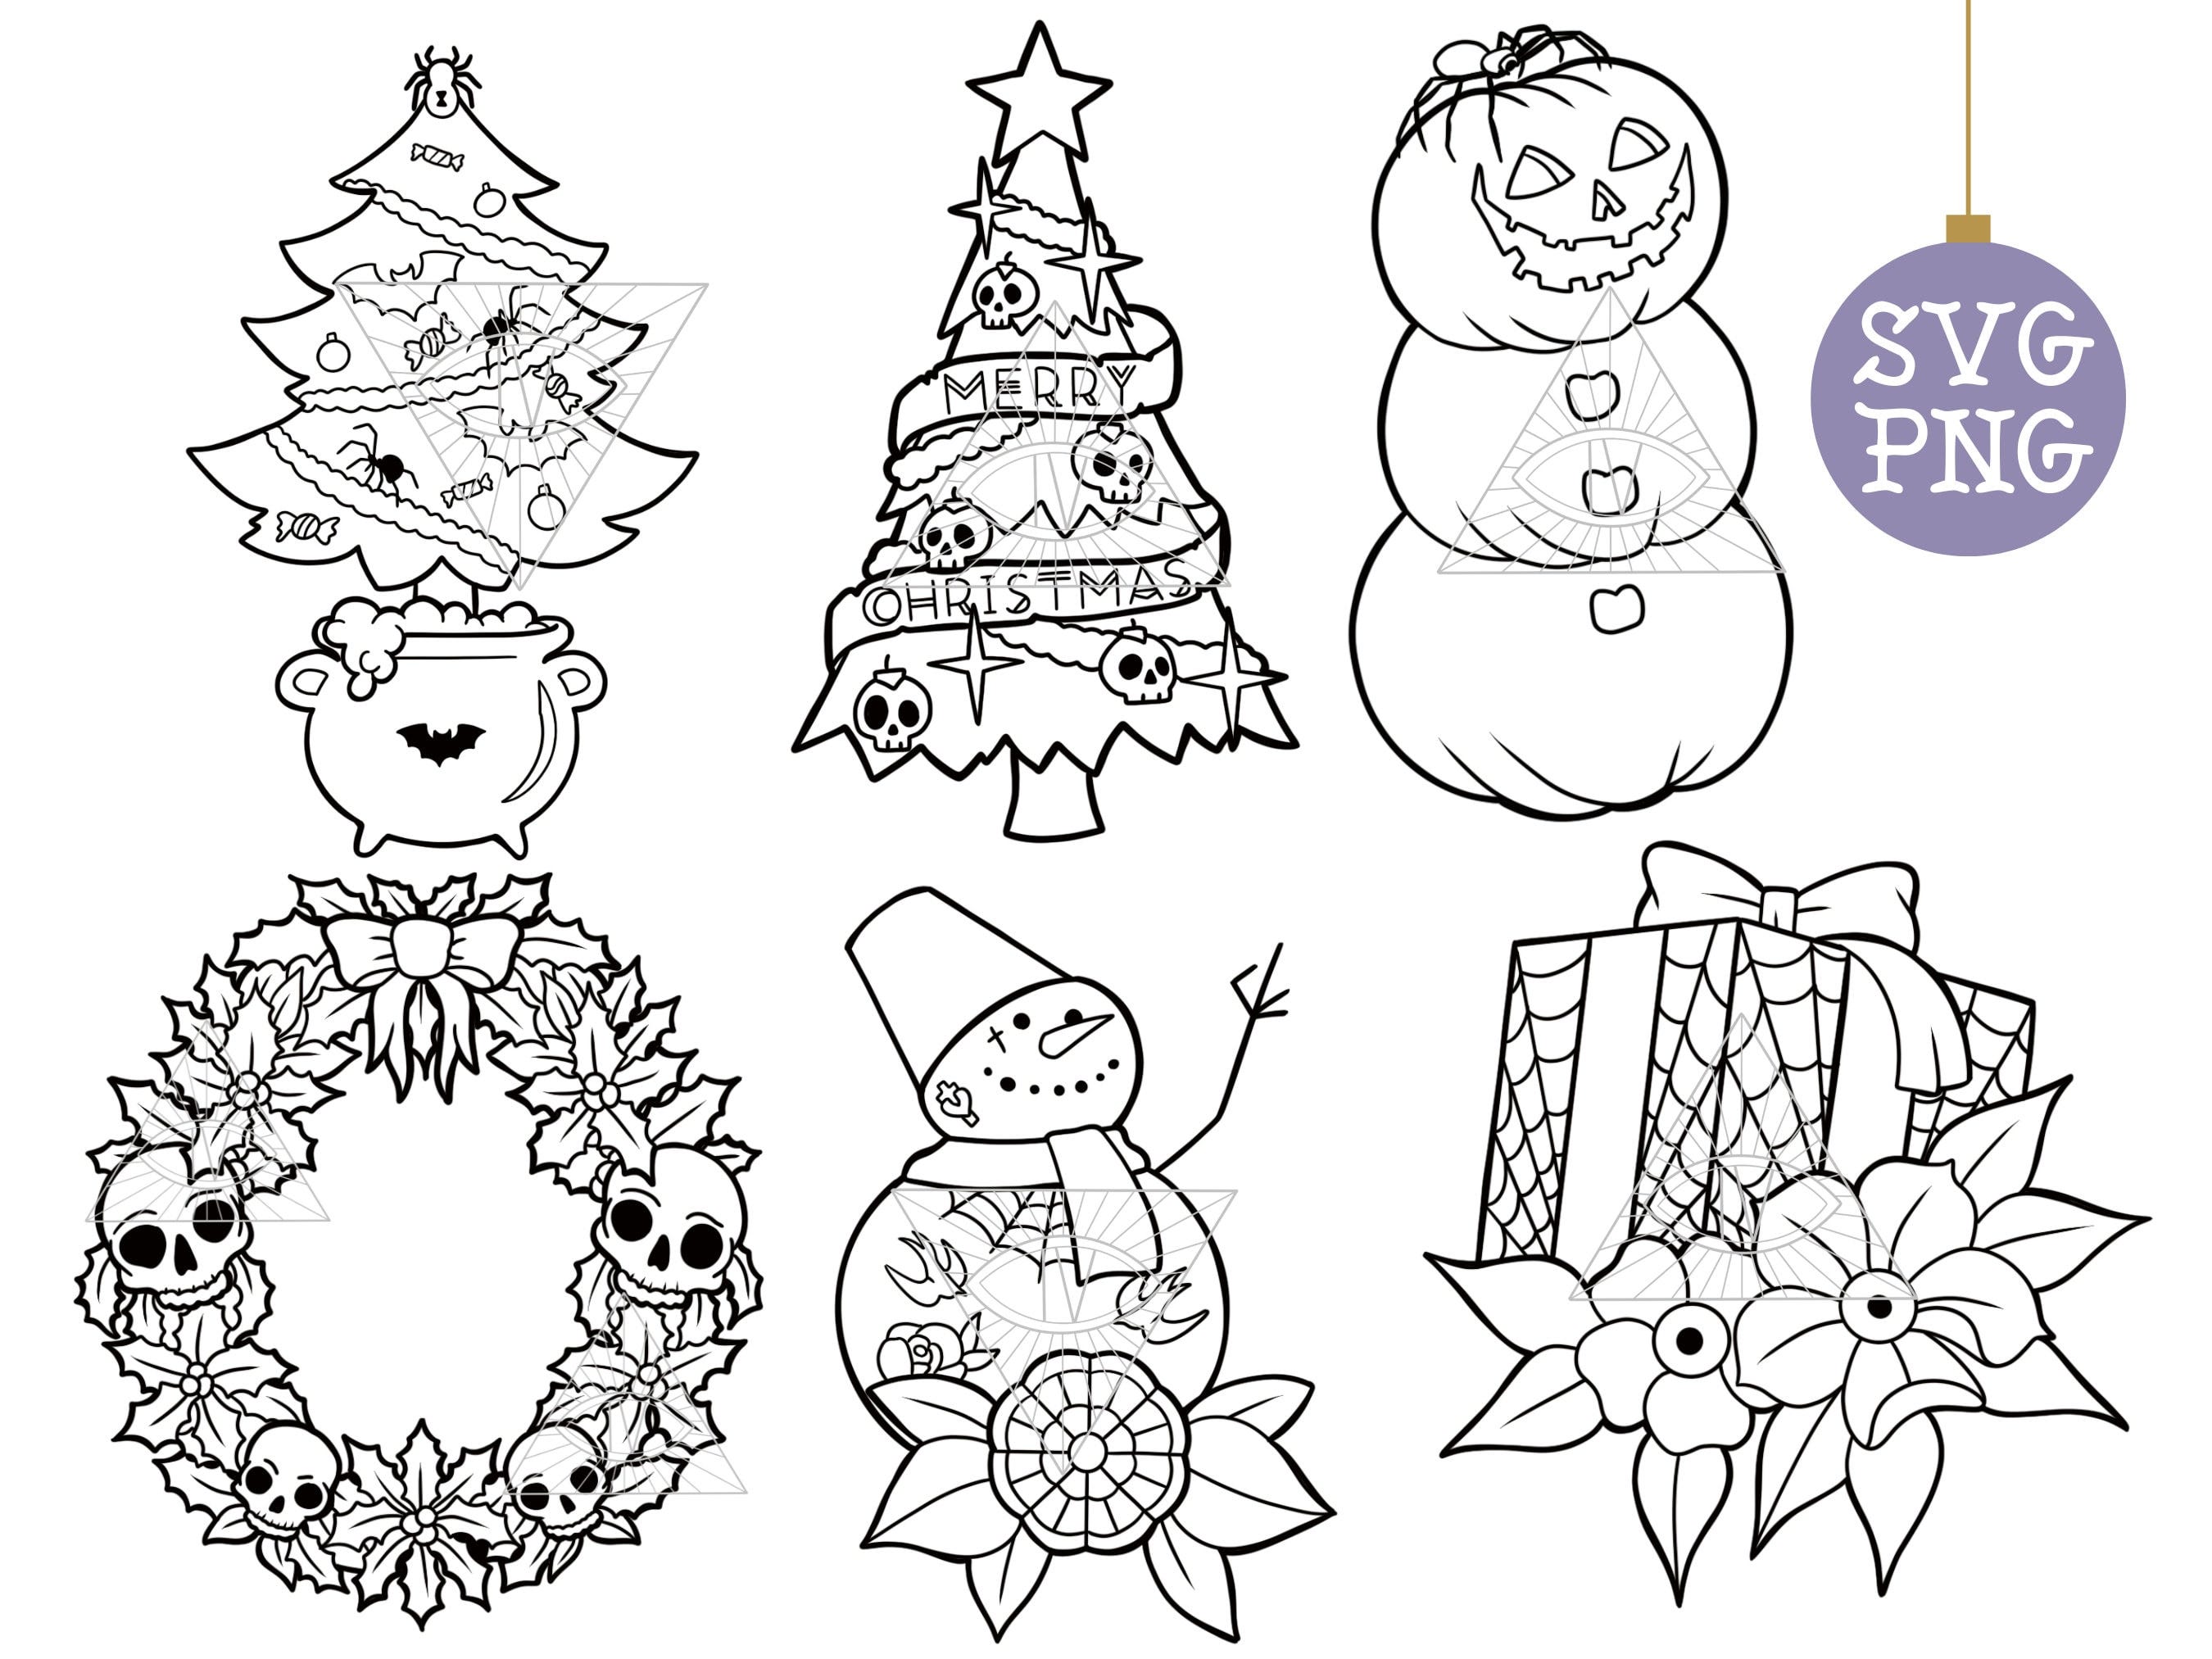 Spooky Christmas Halloween SVG/PNG Laser Cut Files & Printable Stickers | Goth, Creepy, and Witchy Digital Cricut Projects